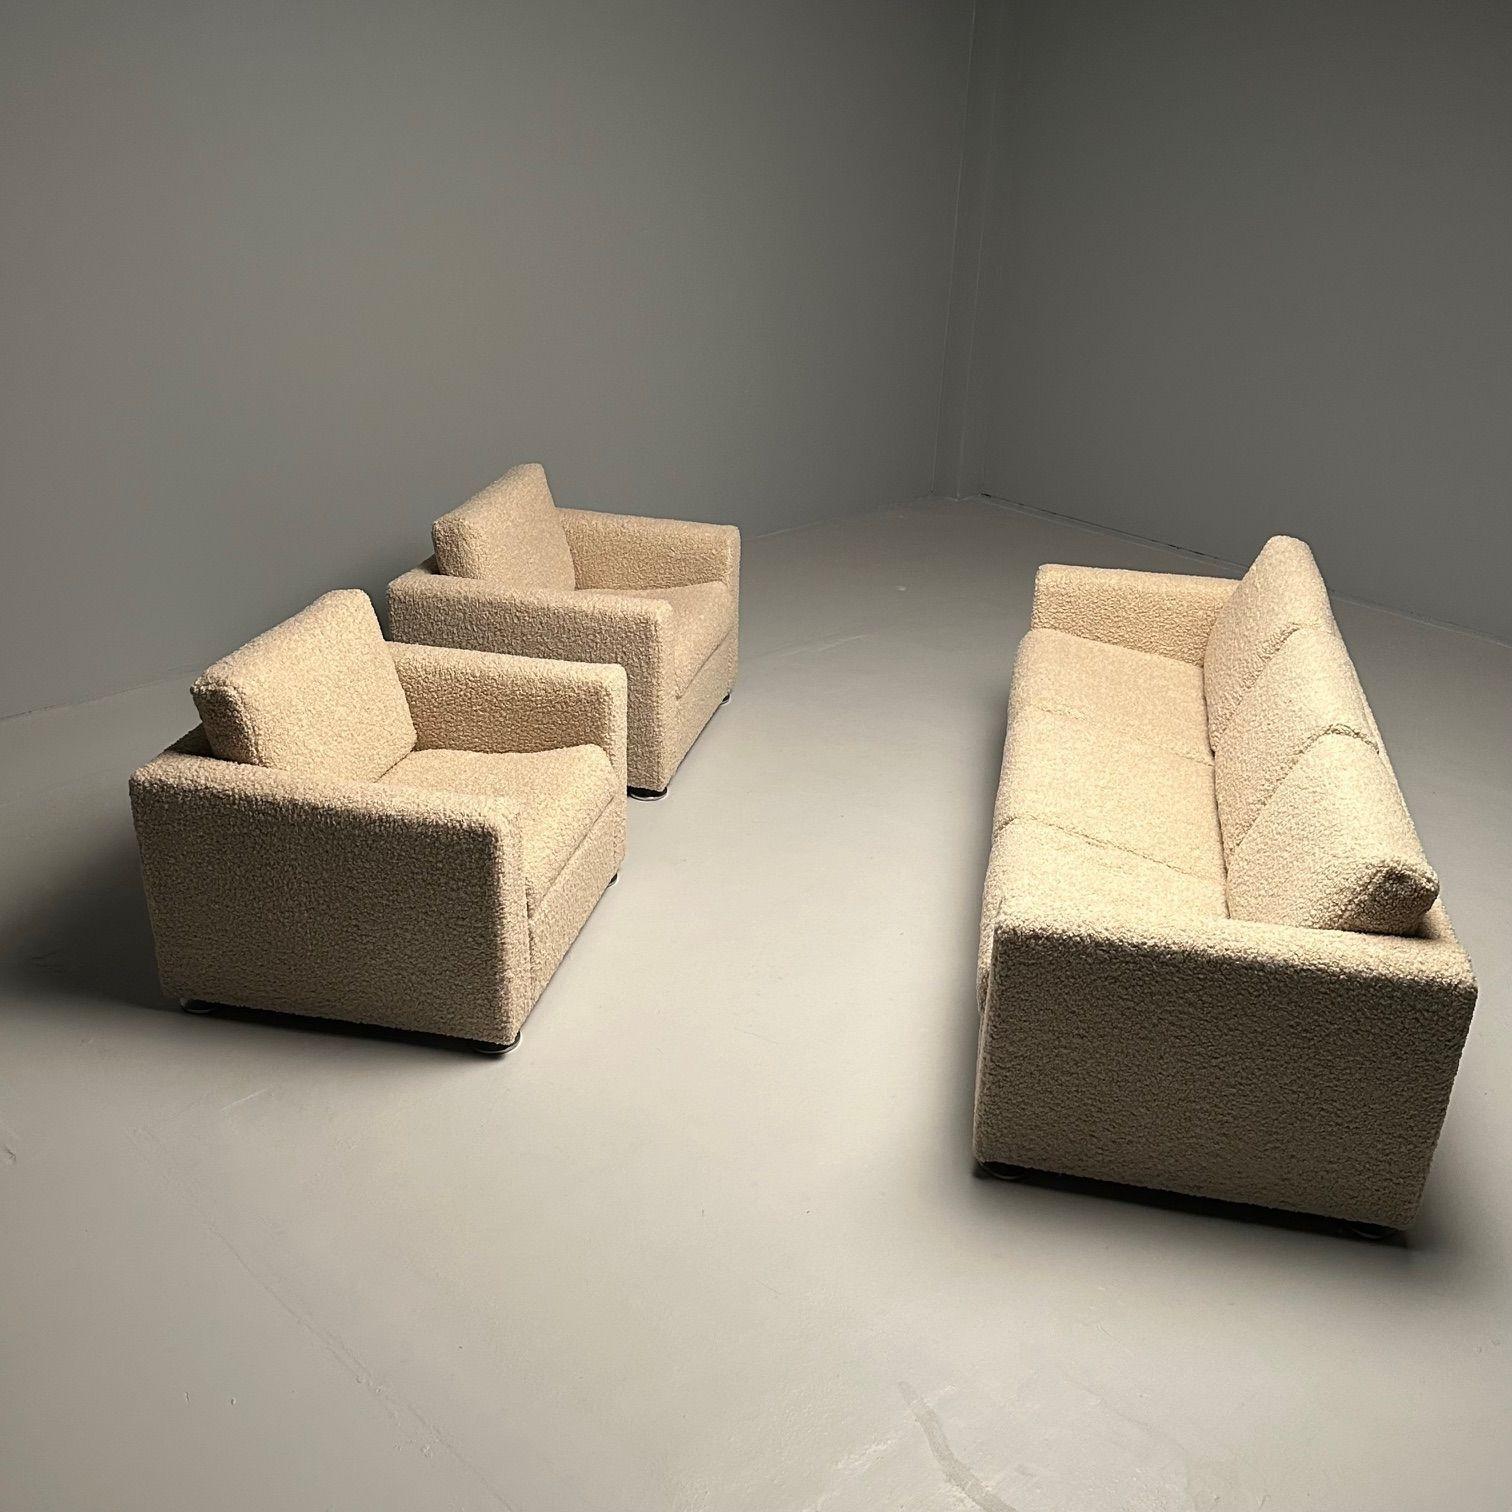 Sofa & Pair Cube Chairs by Stendig, Switzerland, New Sheepskin Boucle, Mid Century Modern, Labeled

A rare Mid Century Modern living room ret in pristine condition. Sofa and pair of Cube Chairs by Stendig Made, in Switzerland, and reupholstered in a